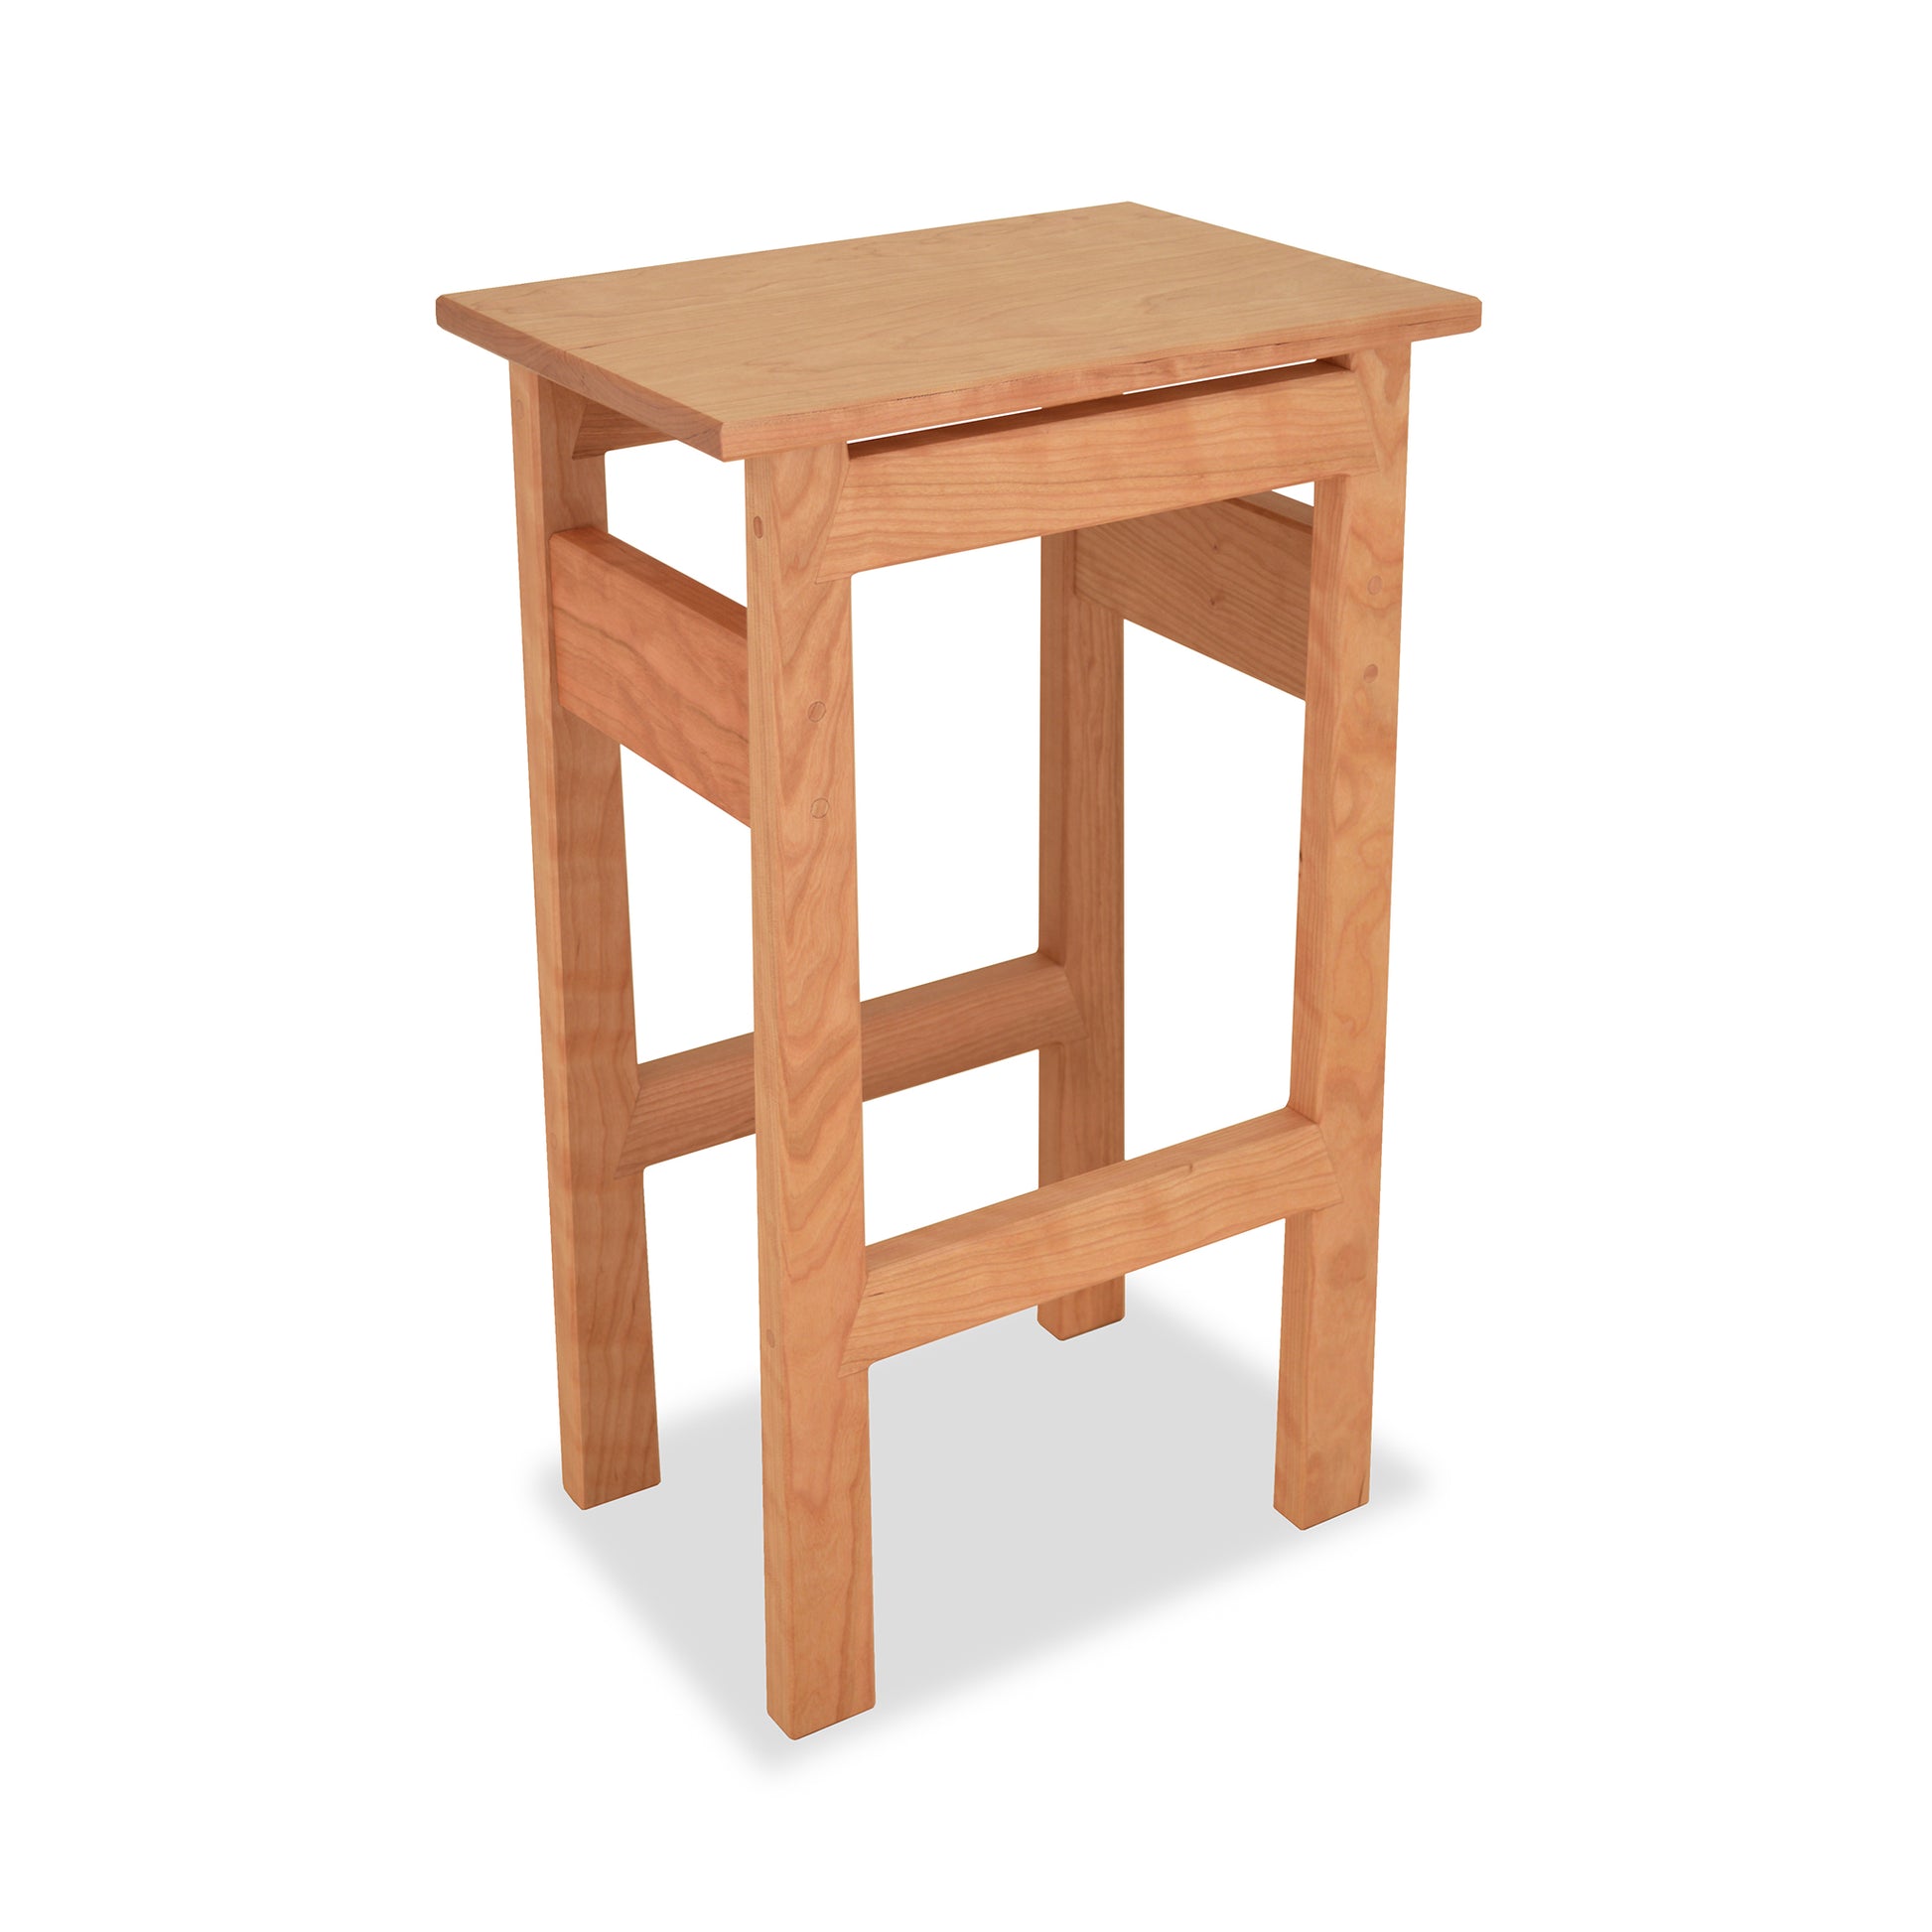 A Maple Corner Woodworks Contemporary Asian Stool on a white background.